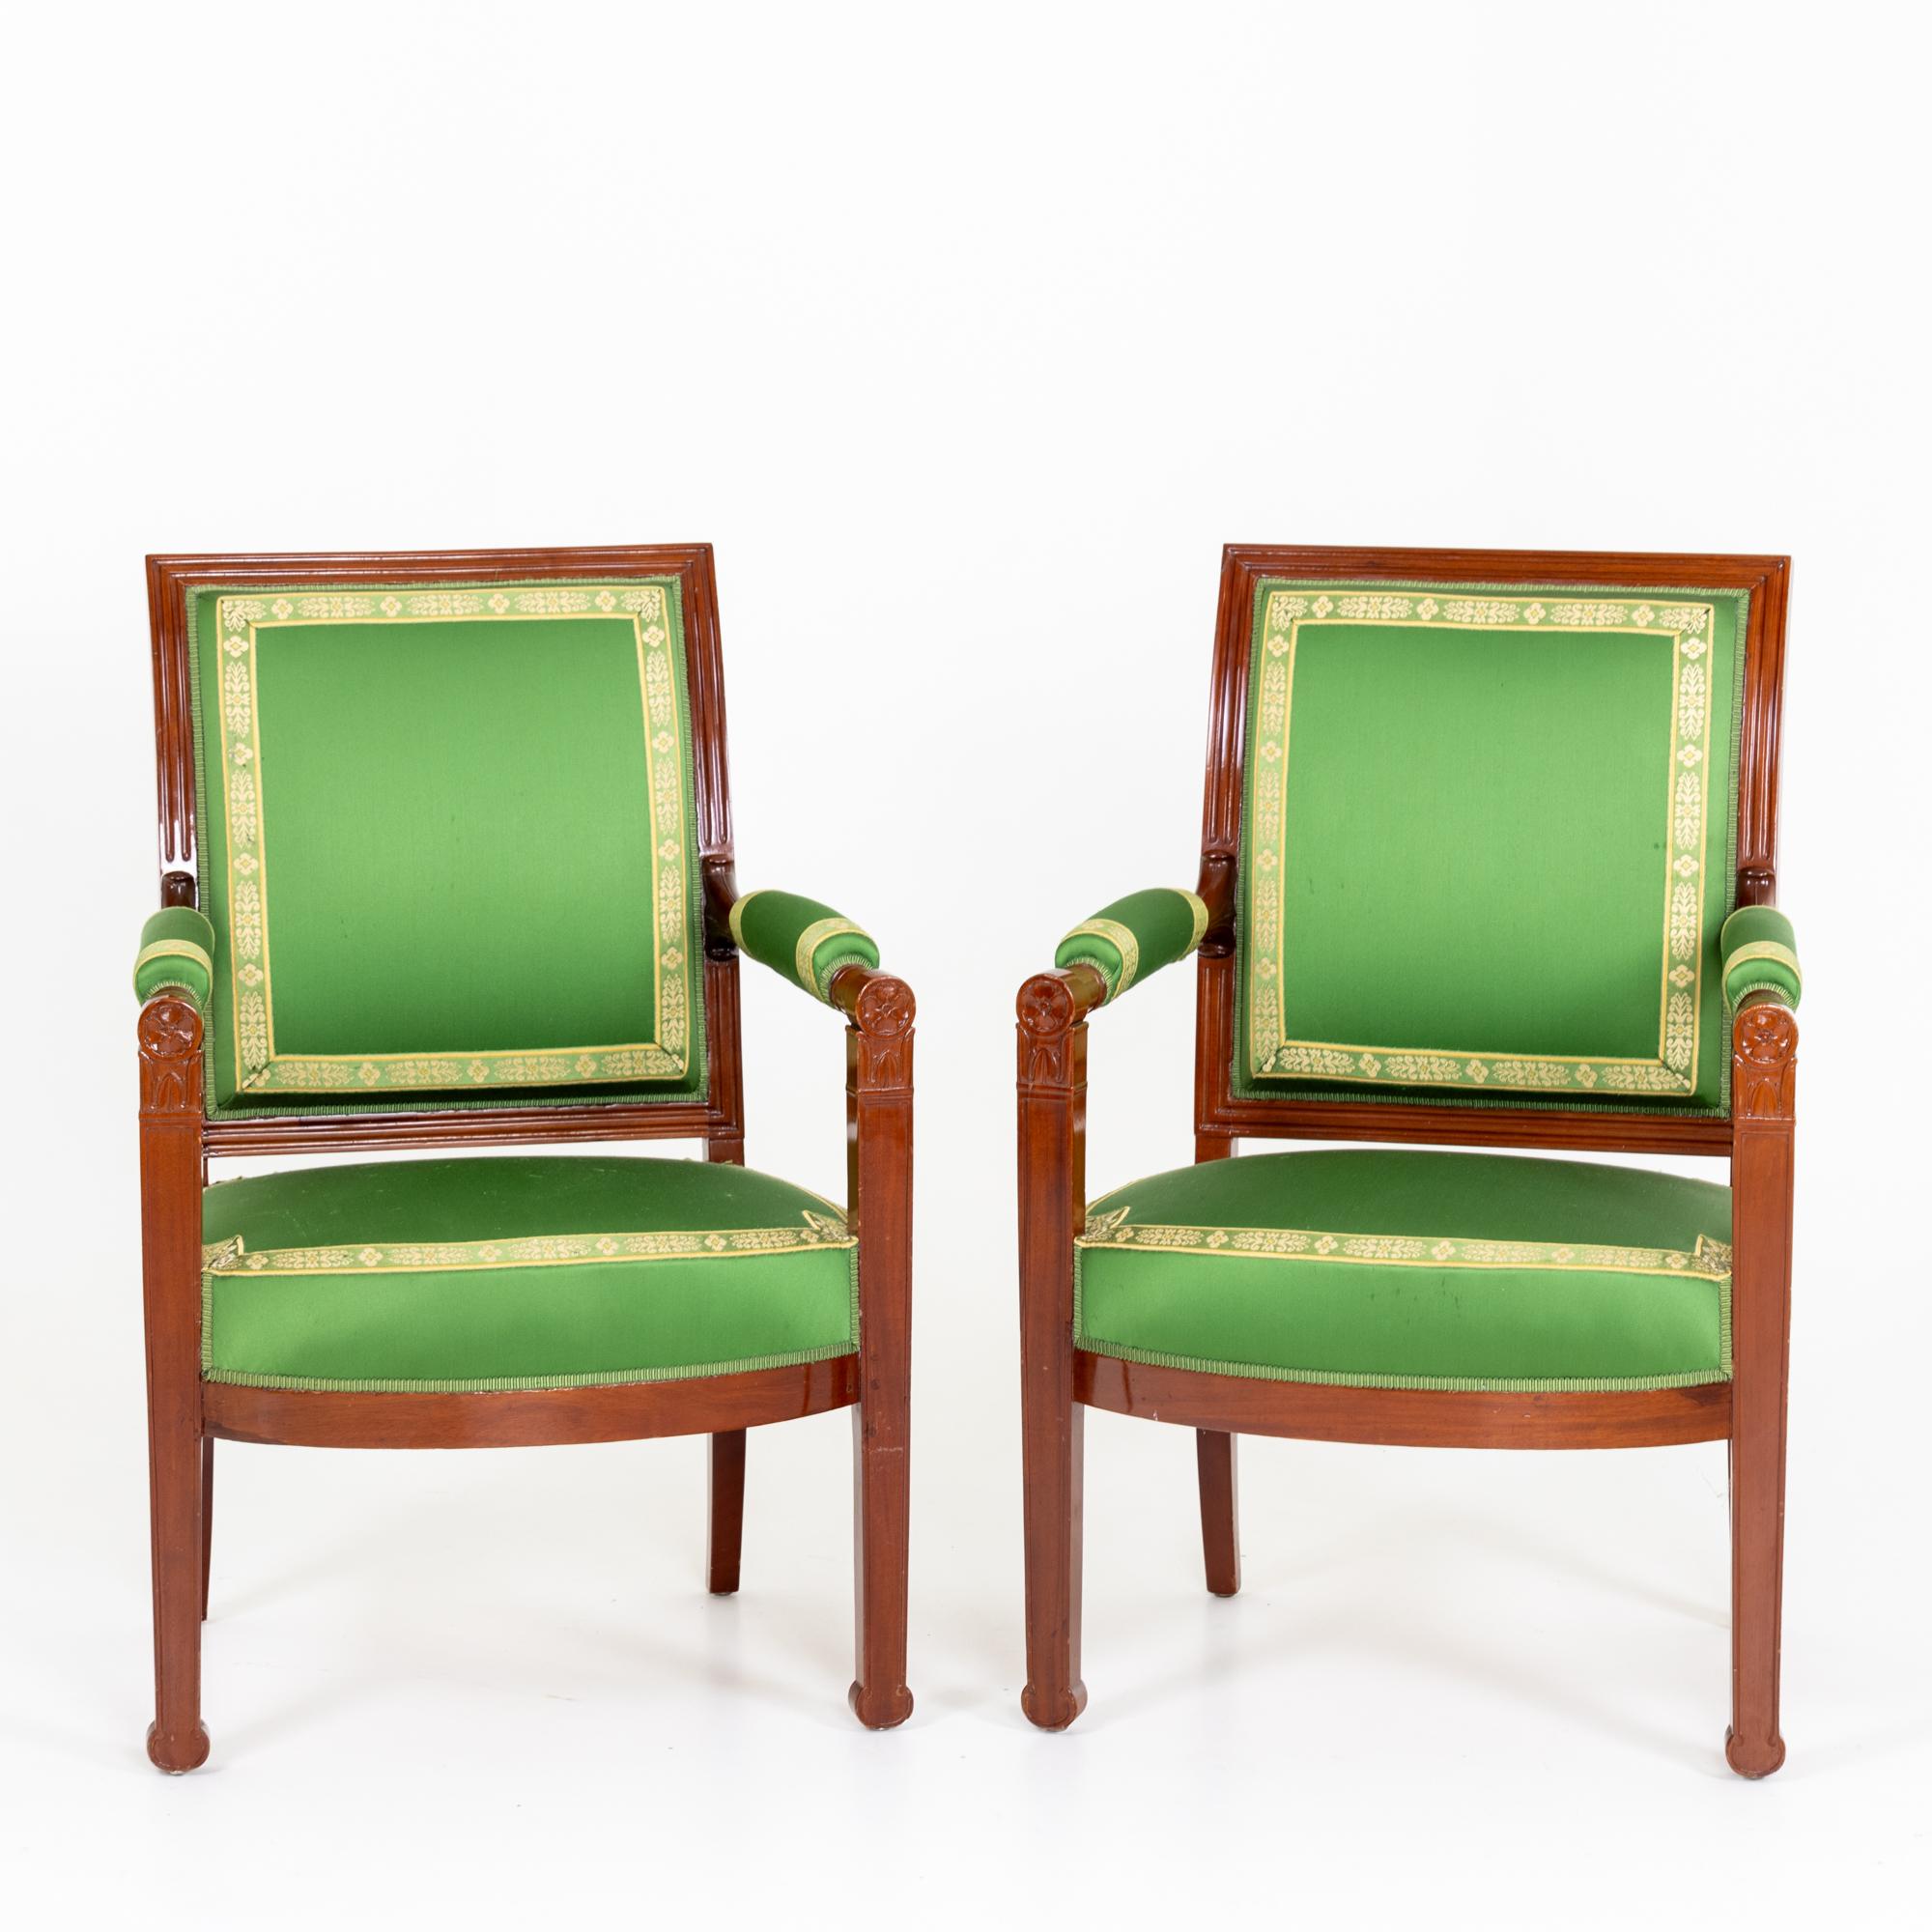 Three-piece seating group consisting of two armchairs (95 x 66 x 64 x 45 cm) and one large armchair (97 x 98 x 70 x 45 cm) made of mahogany. The group is covered with a green fabric. France, around 1790.